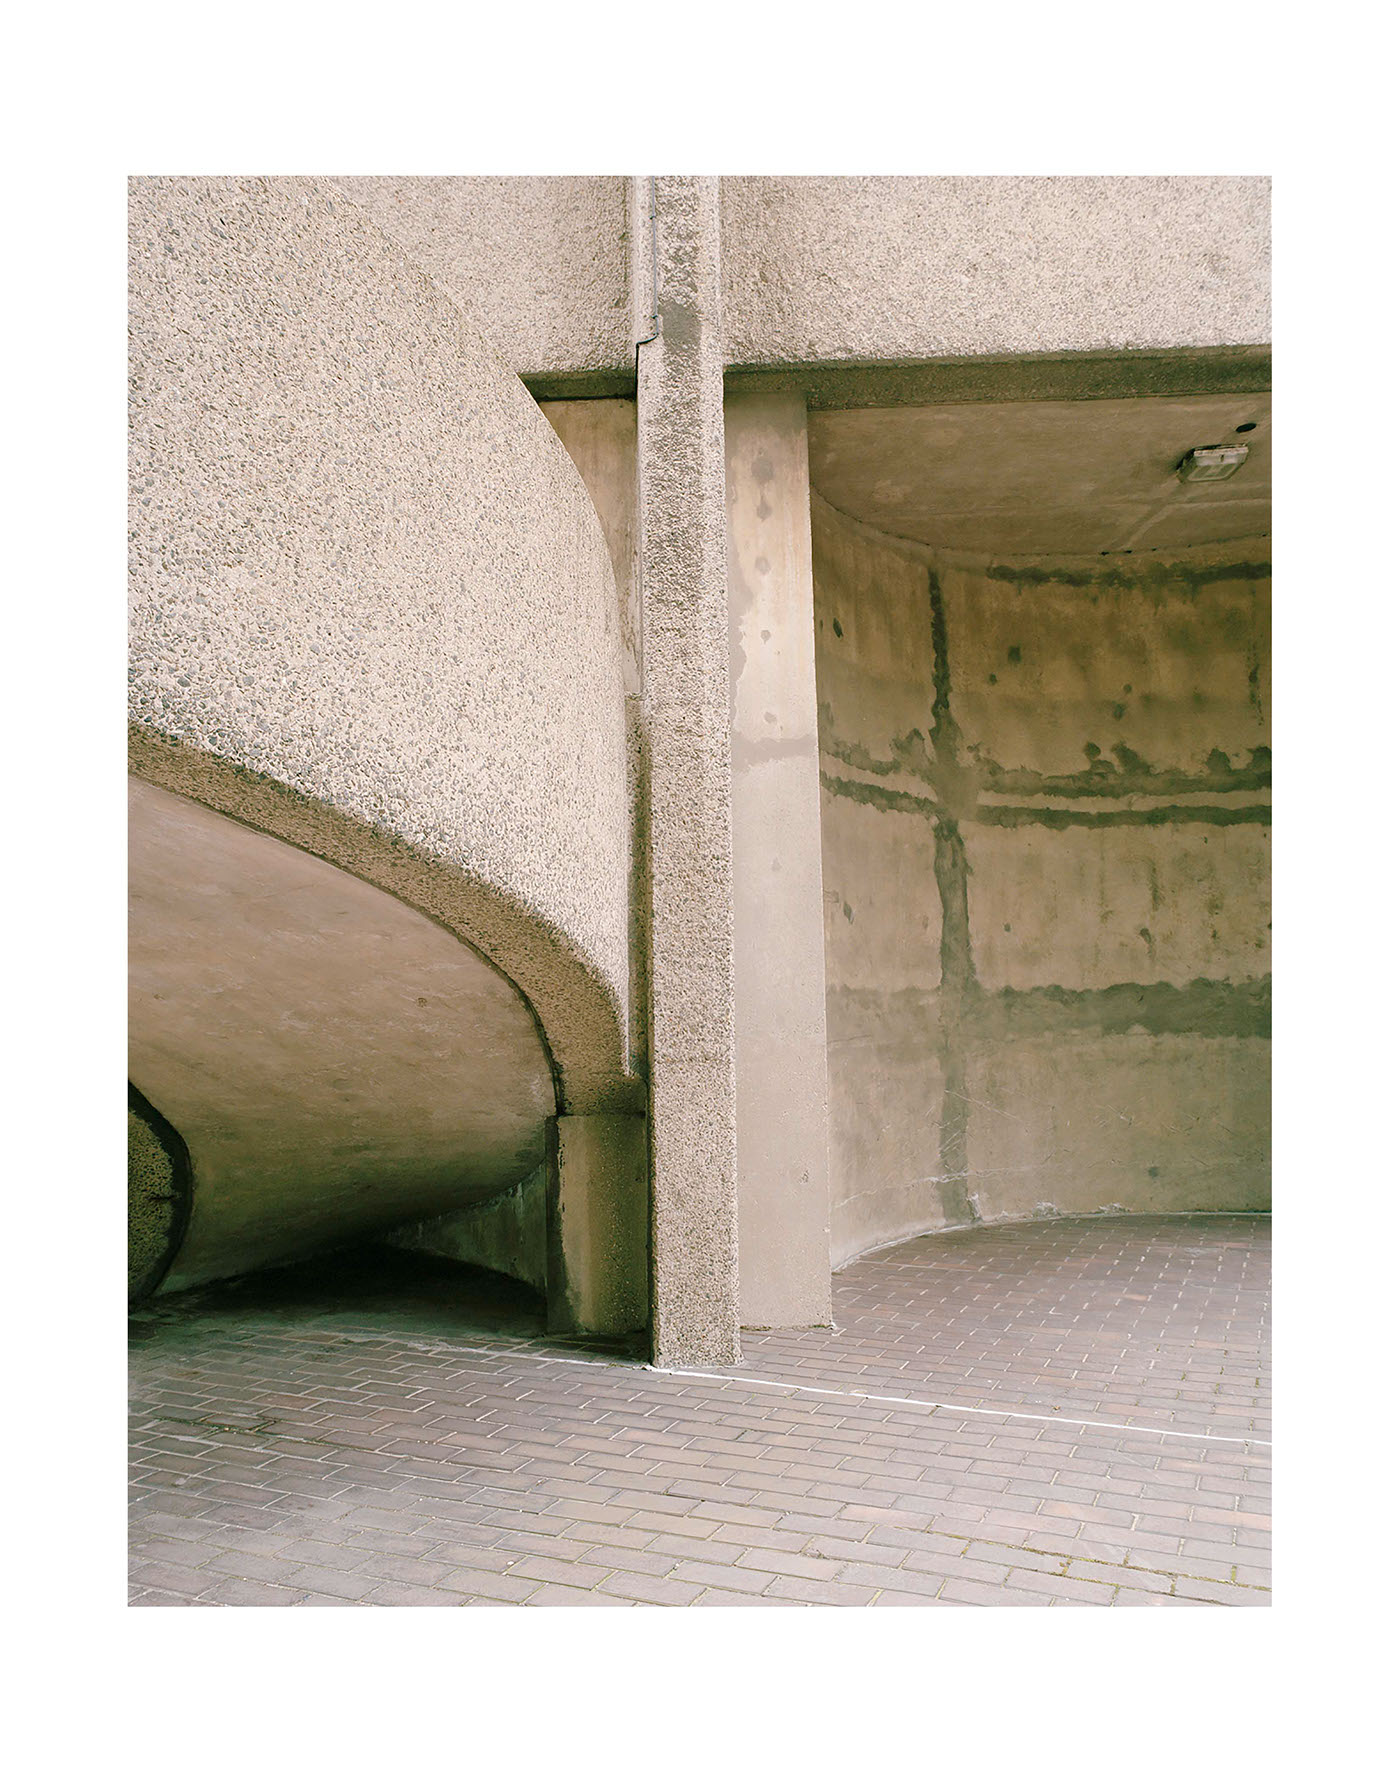 barbican Brutalist Brutalism housing estate concrete Mamiya brutalist architecture architecture buildings abstract